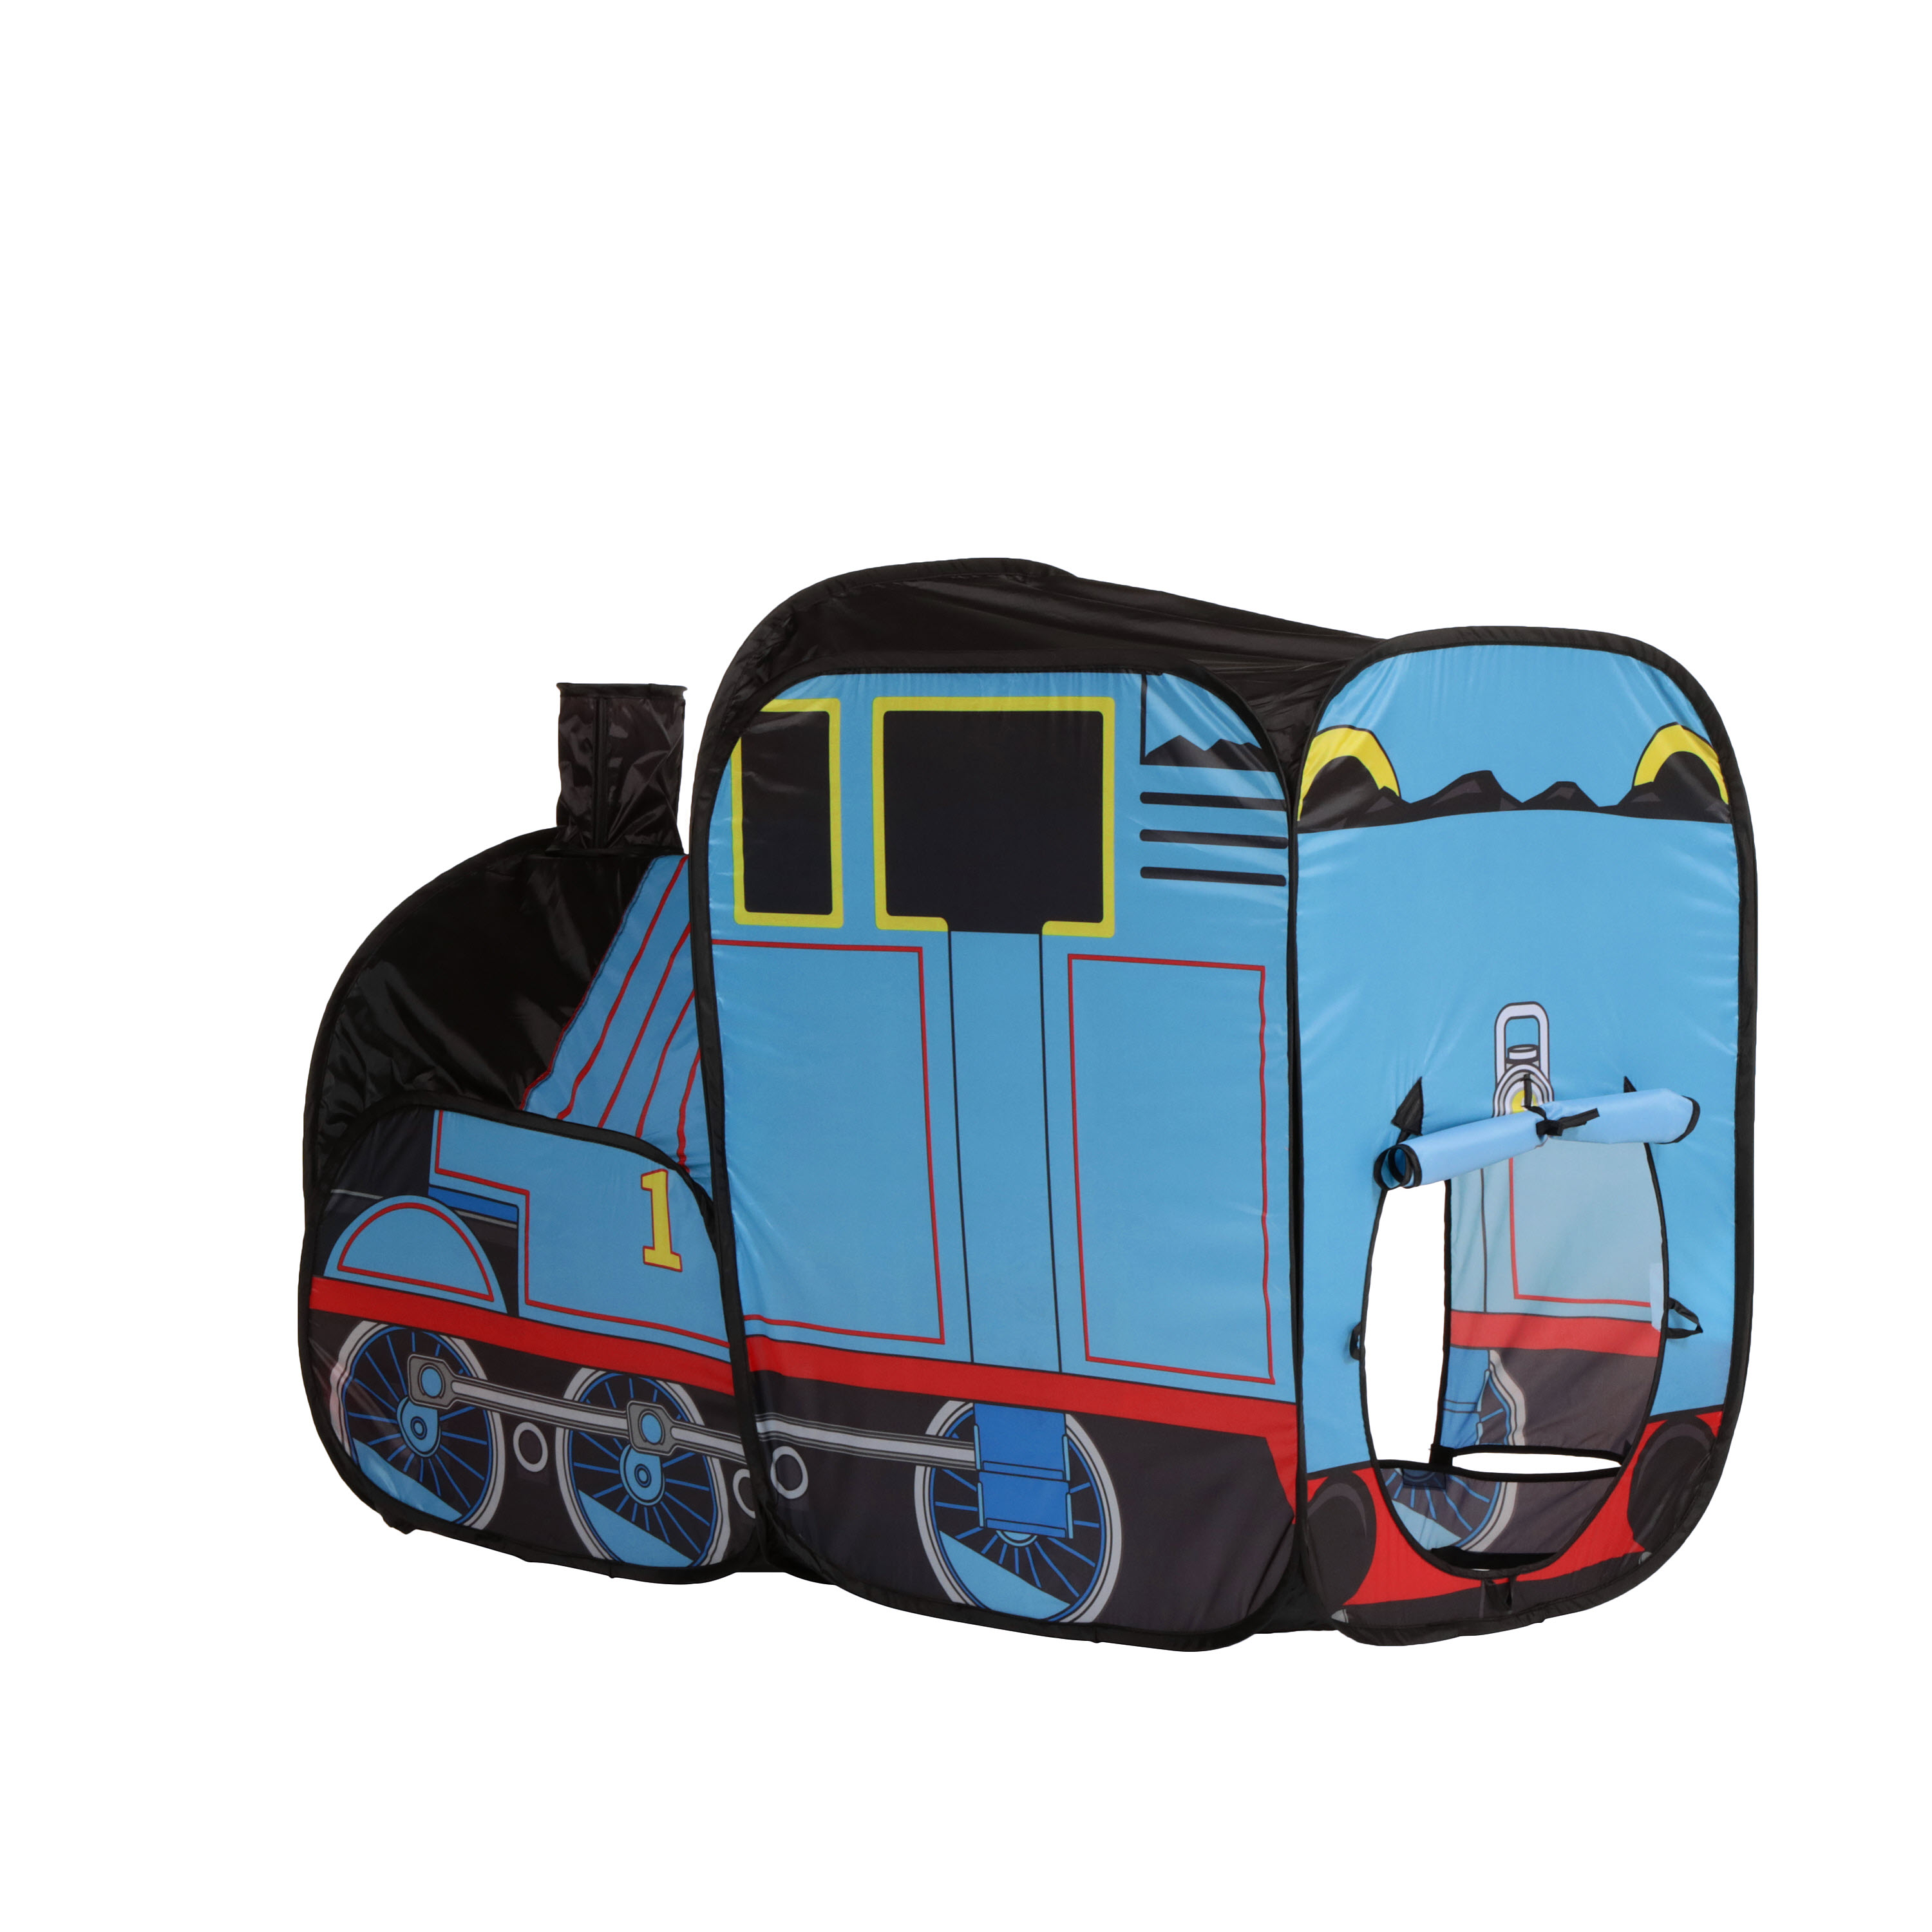 emulsie Ontwijken Arashigaoka Thomas and Friends, Thomas the Train Pop-up Tent, Polyester Material for  Inside & Outside Use, Children 3+ - Walmart.com